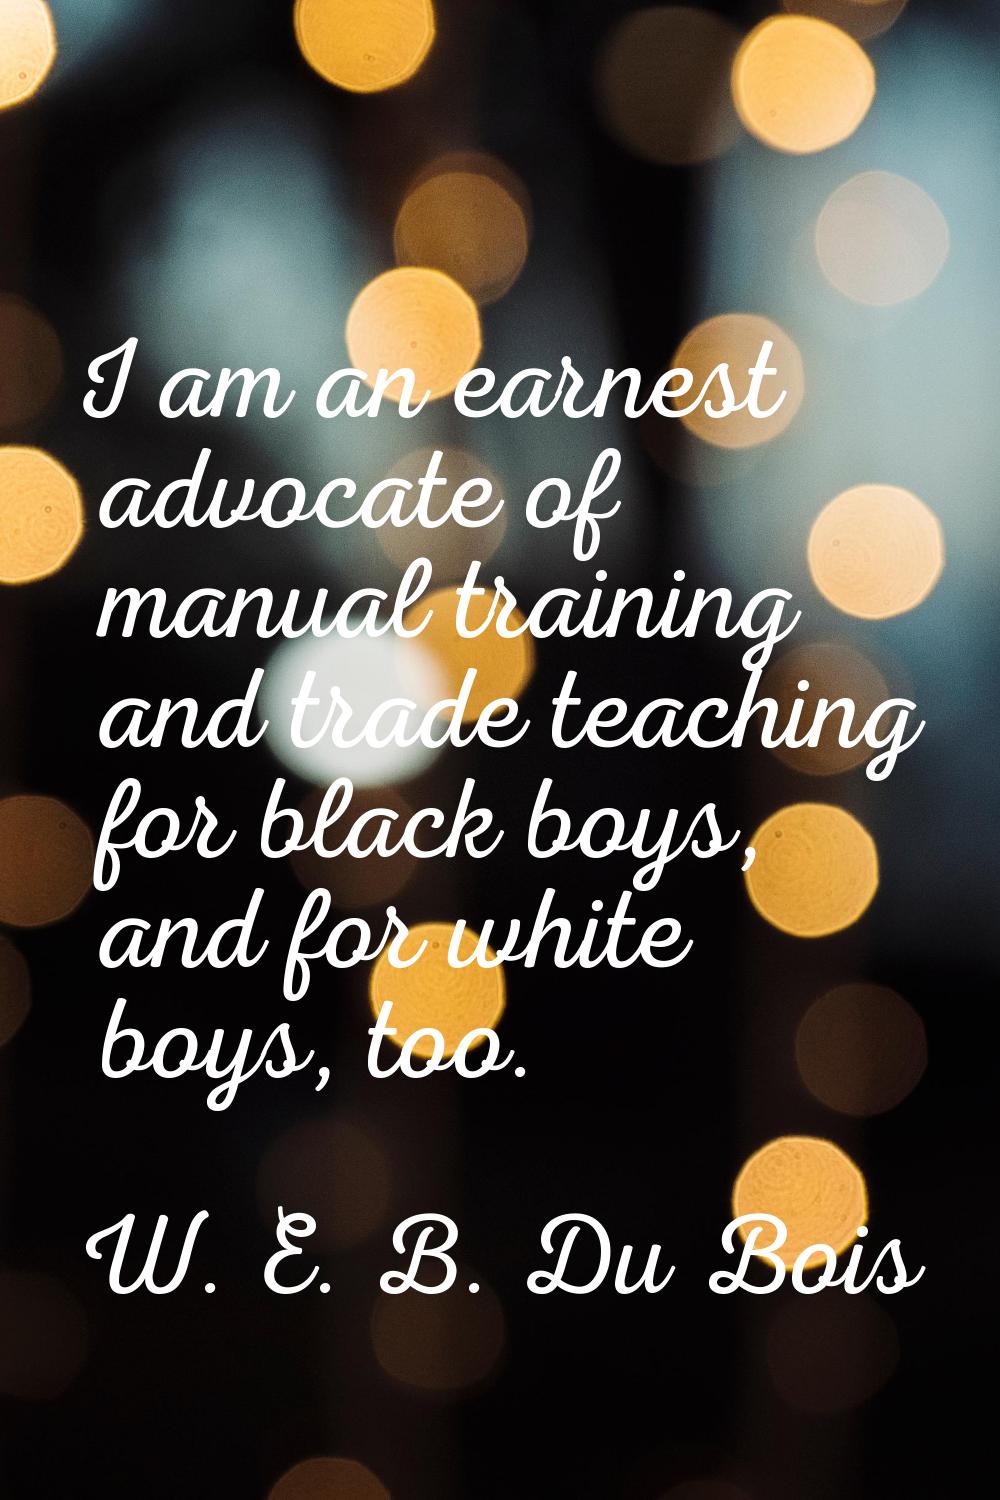 I am an earnest advocate of manual training and trade teaching for black boys, and for white boys, 